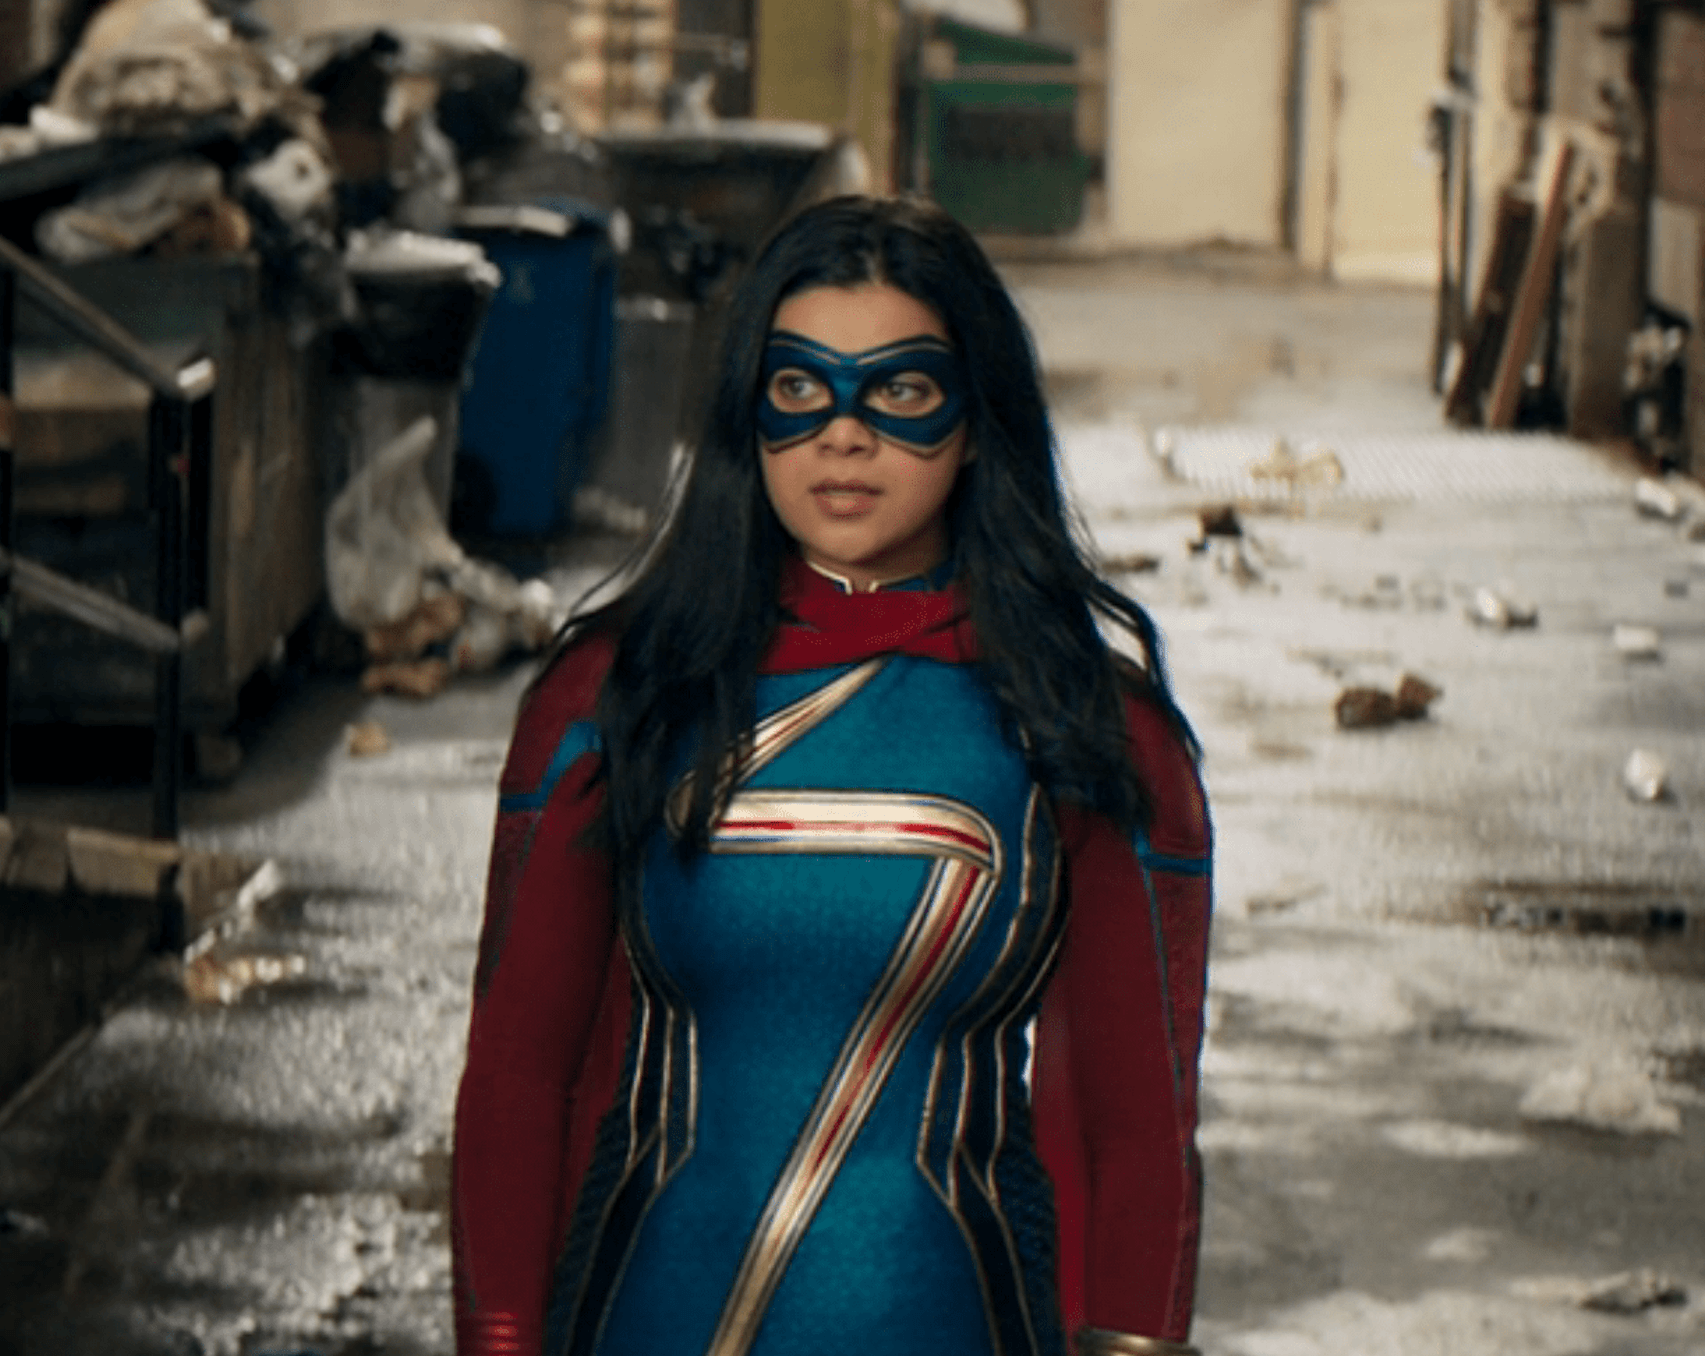 Is Ms. Marvel a mutant in the MCU?